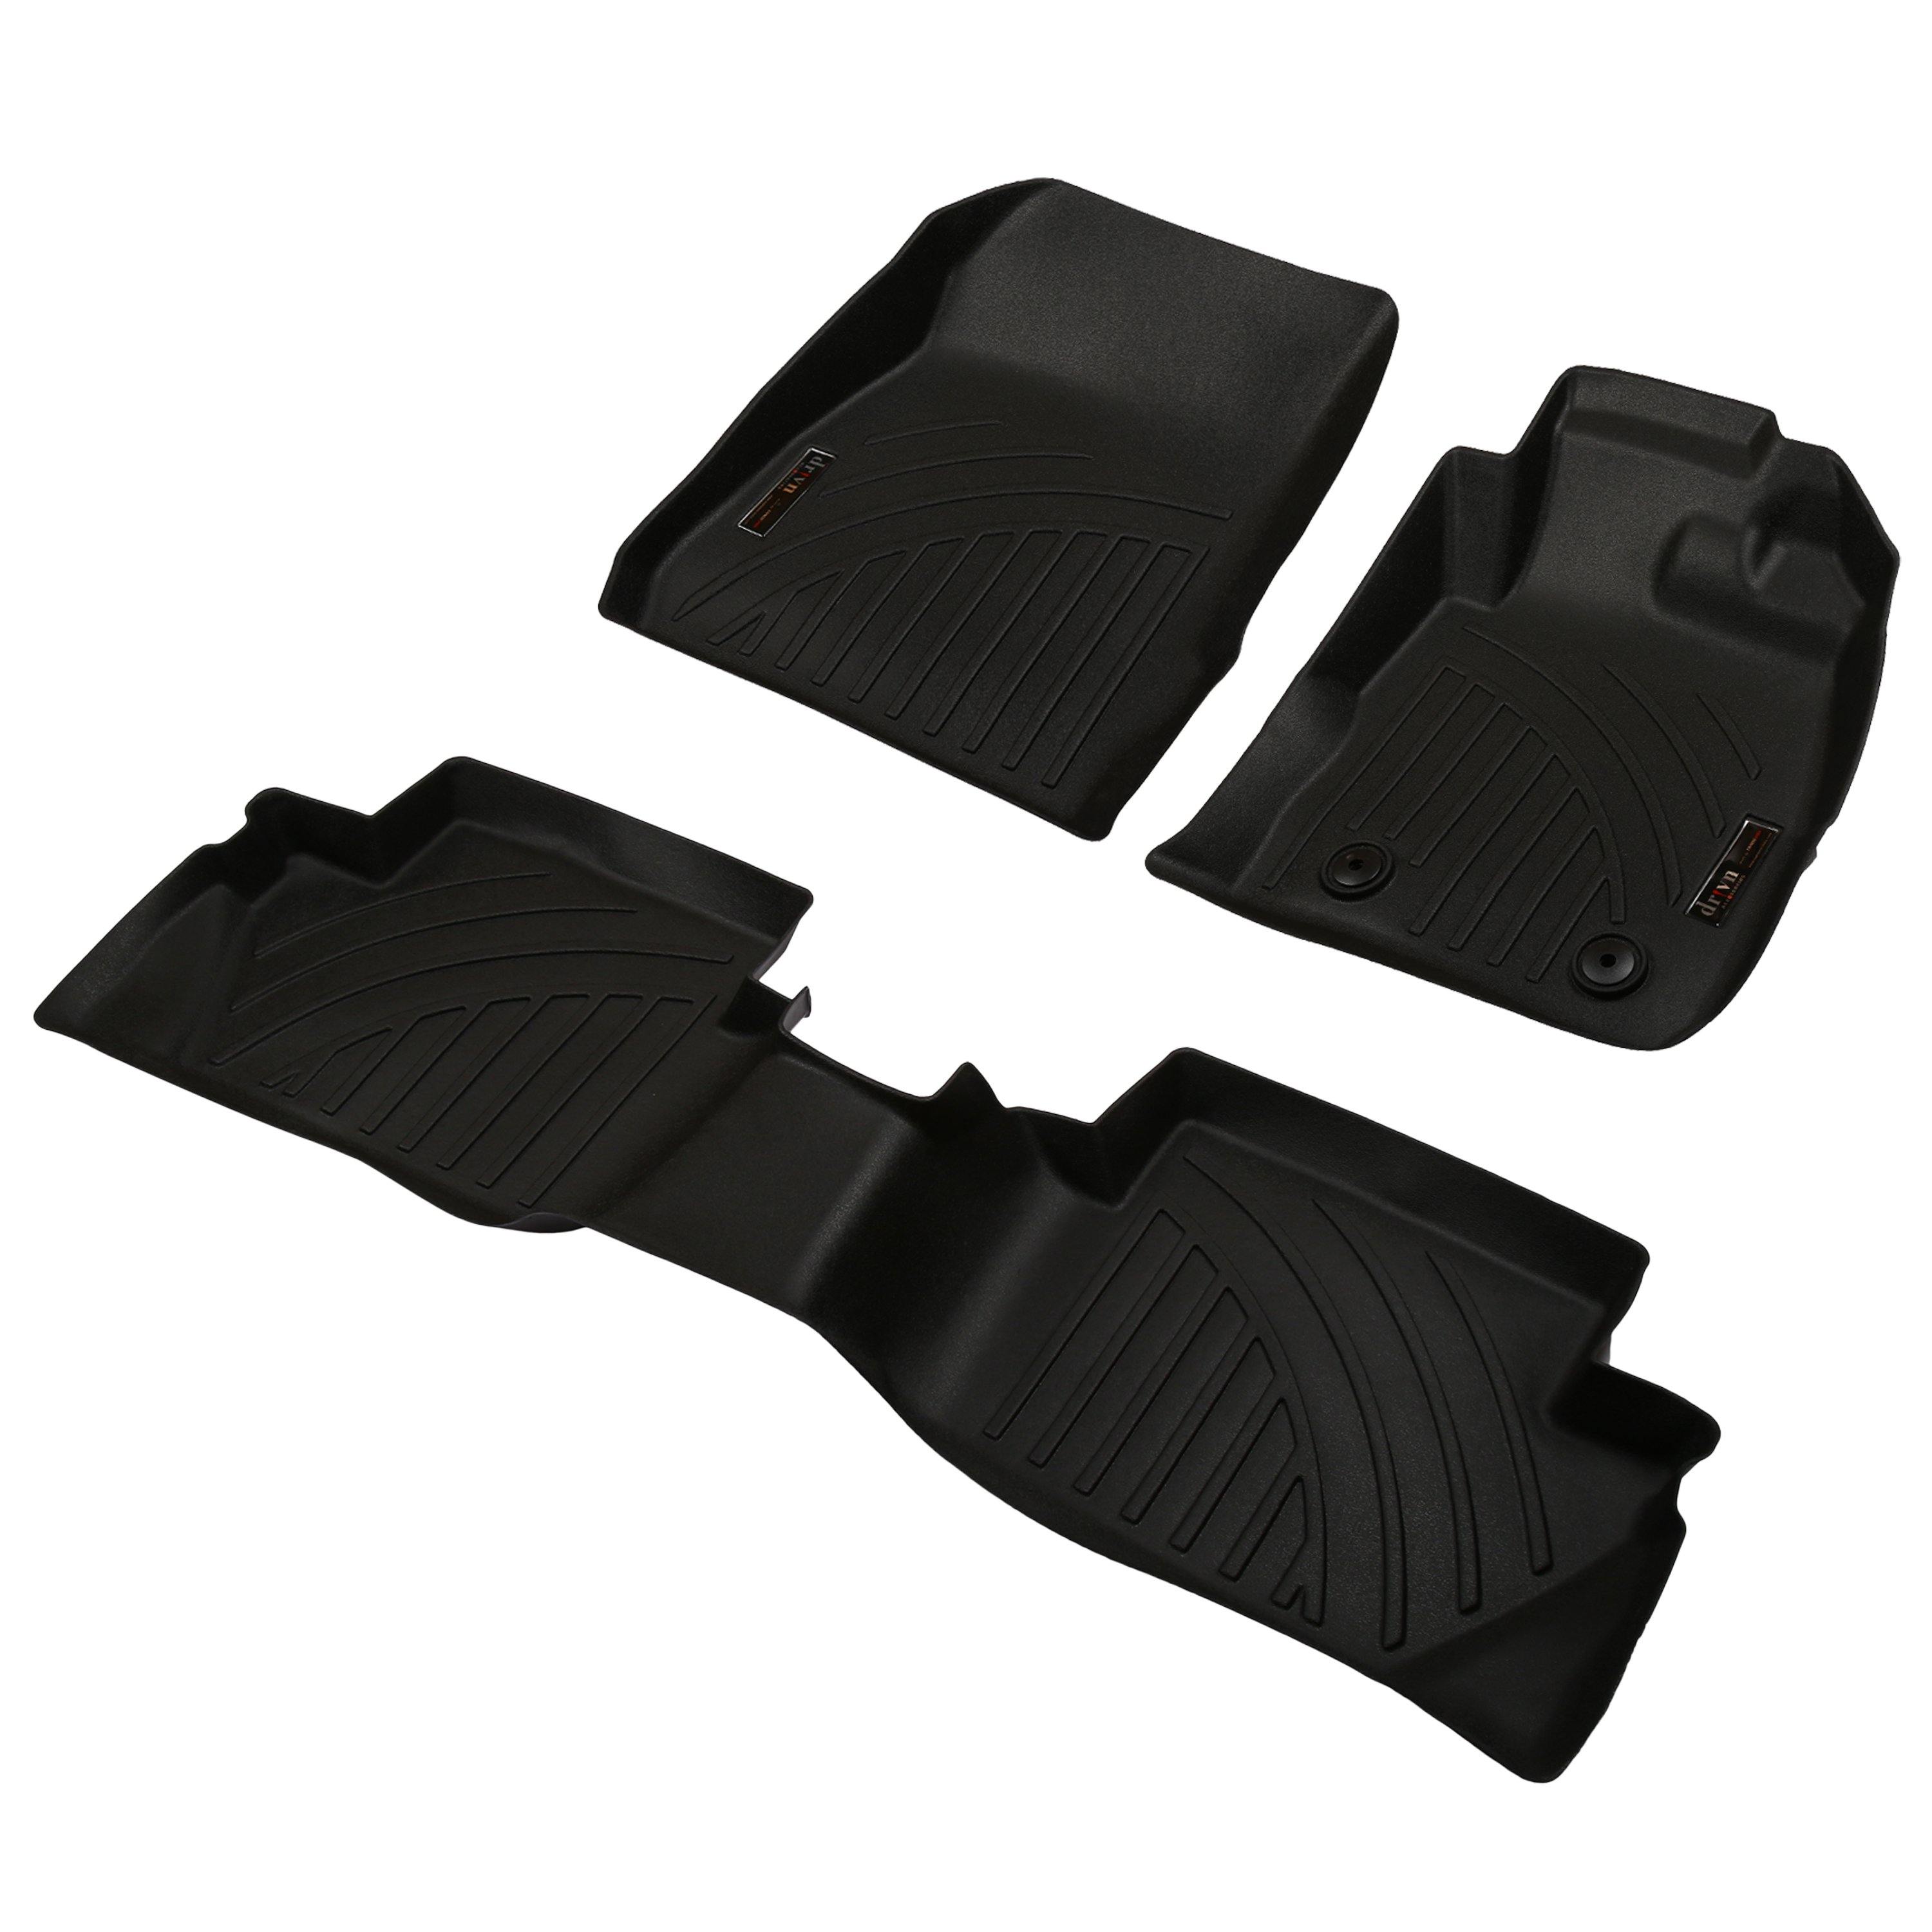 Drivn 5D TPV Car Foot Mat for Ford EcoSport - Black, 5D Car Floor Mat, Customised Car Floor Mat for Ford EcoSport (Set of 3) - CARMATE®